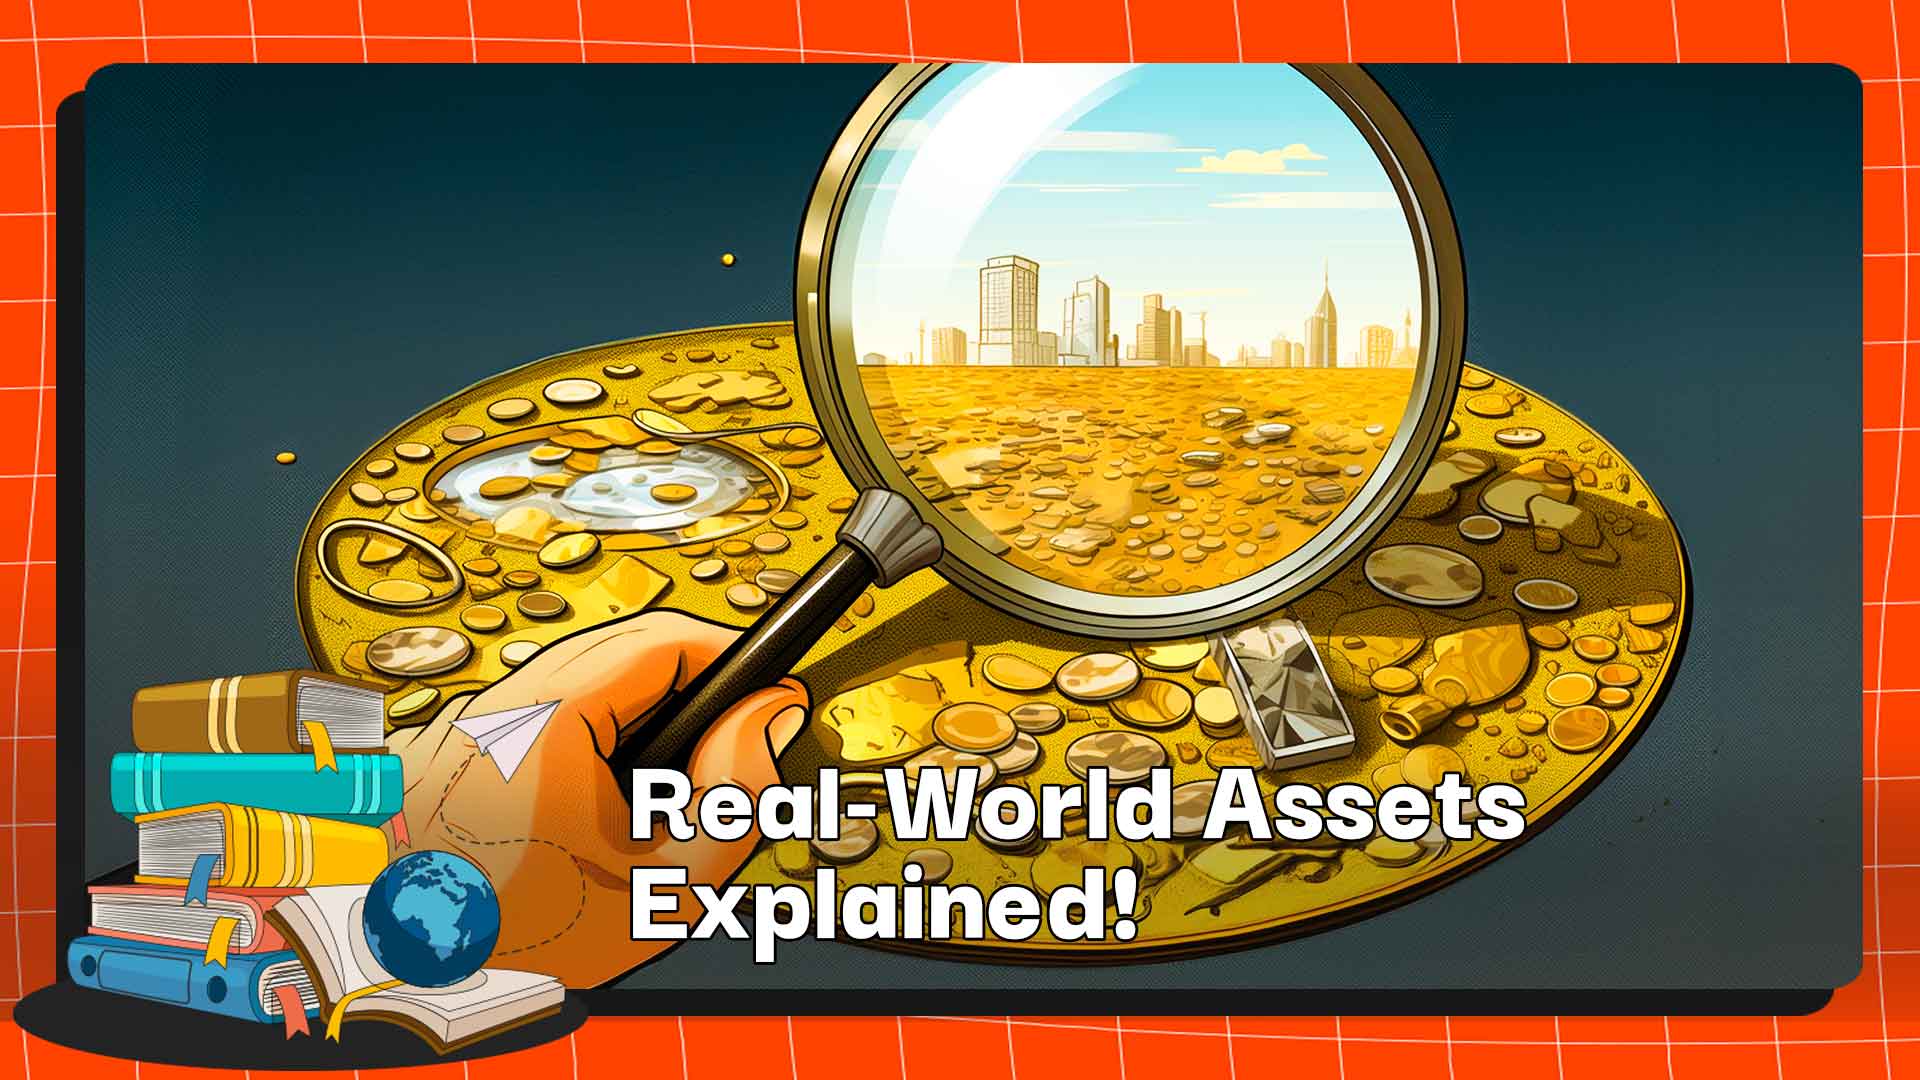 Real-World Assets Explained!